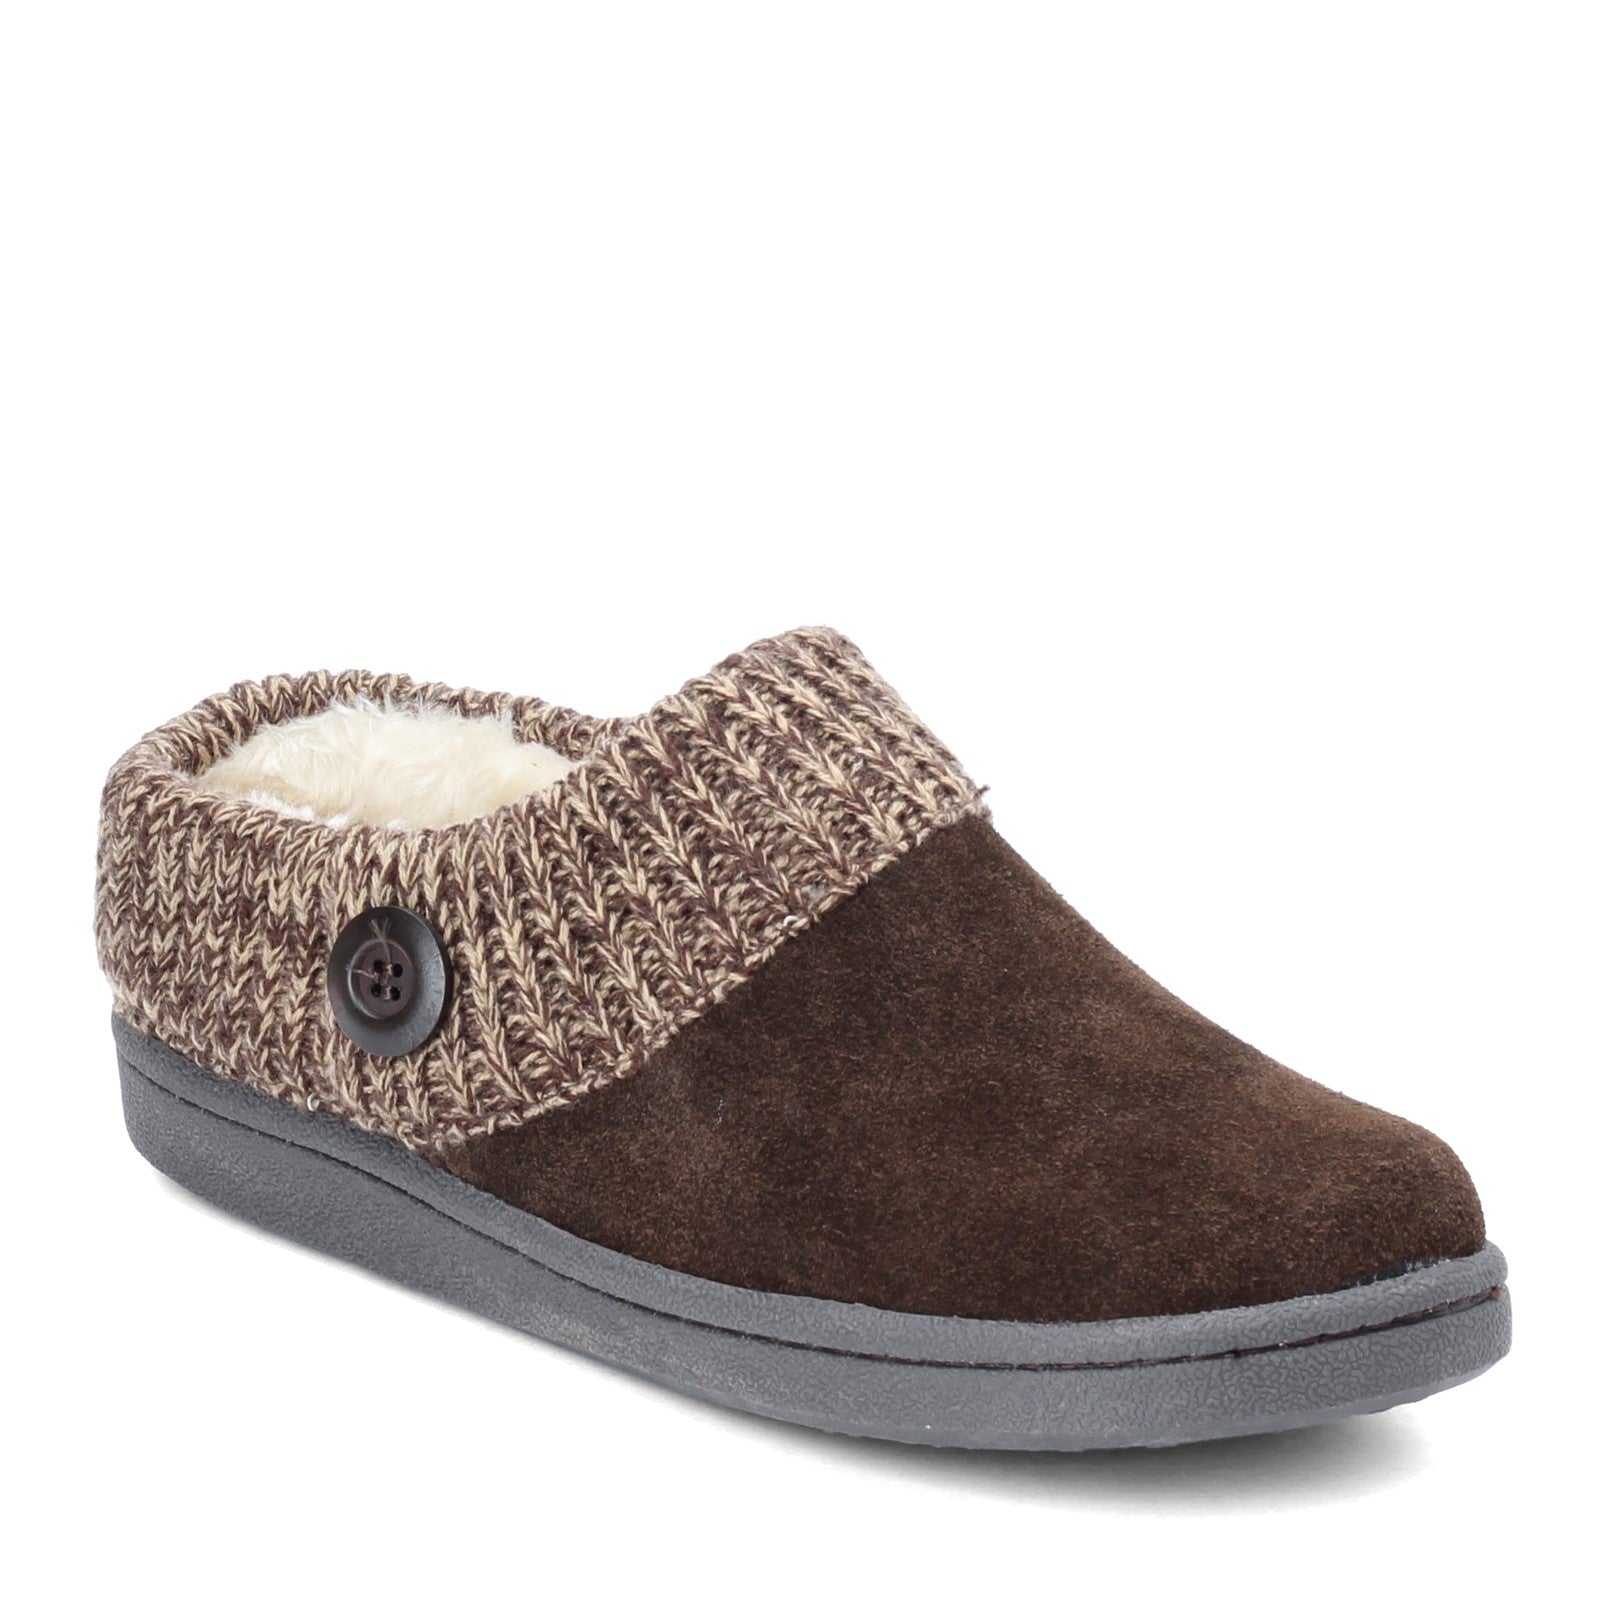 Clarks Women's Suede Moc Indoor and Outdoor Squared Toe Slip On Casual  Slippers (Brown Premium Suede, 10) - Walmart.com